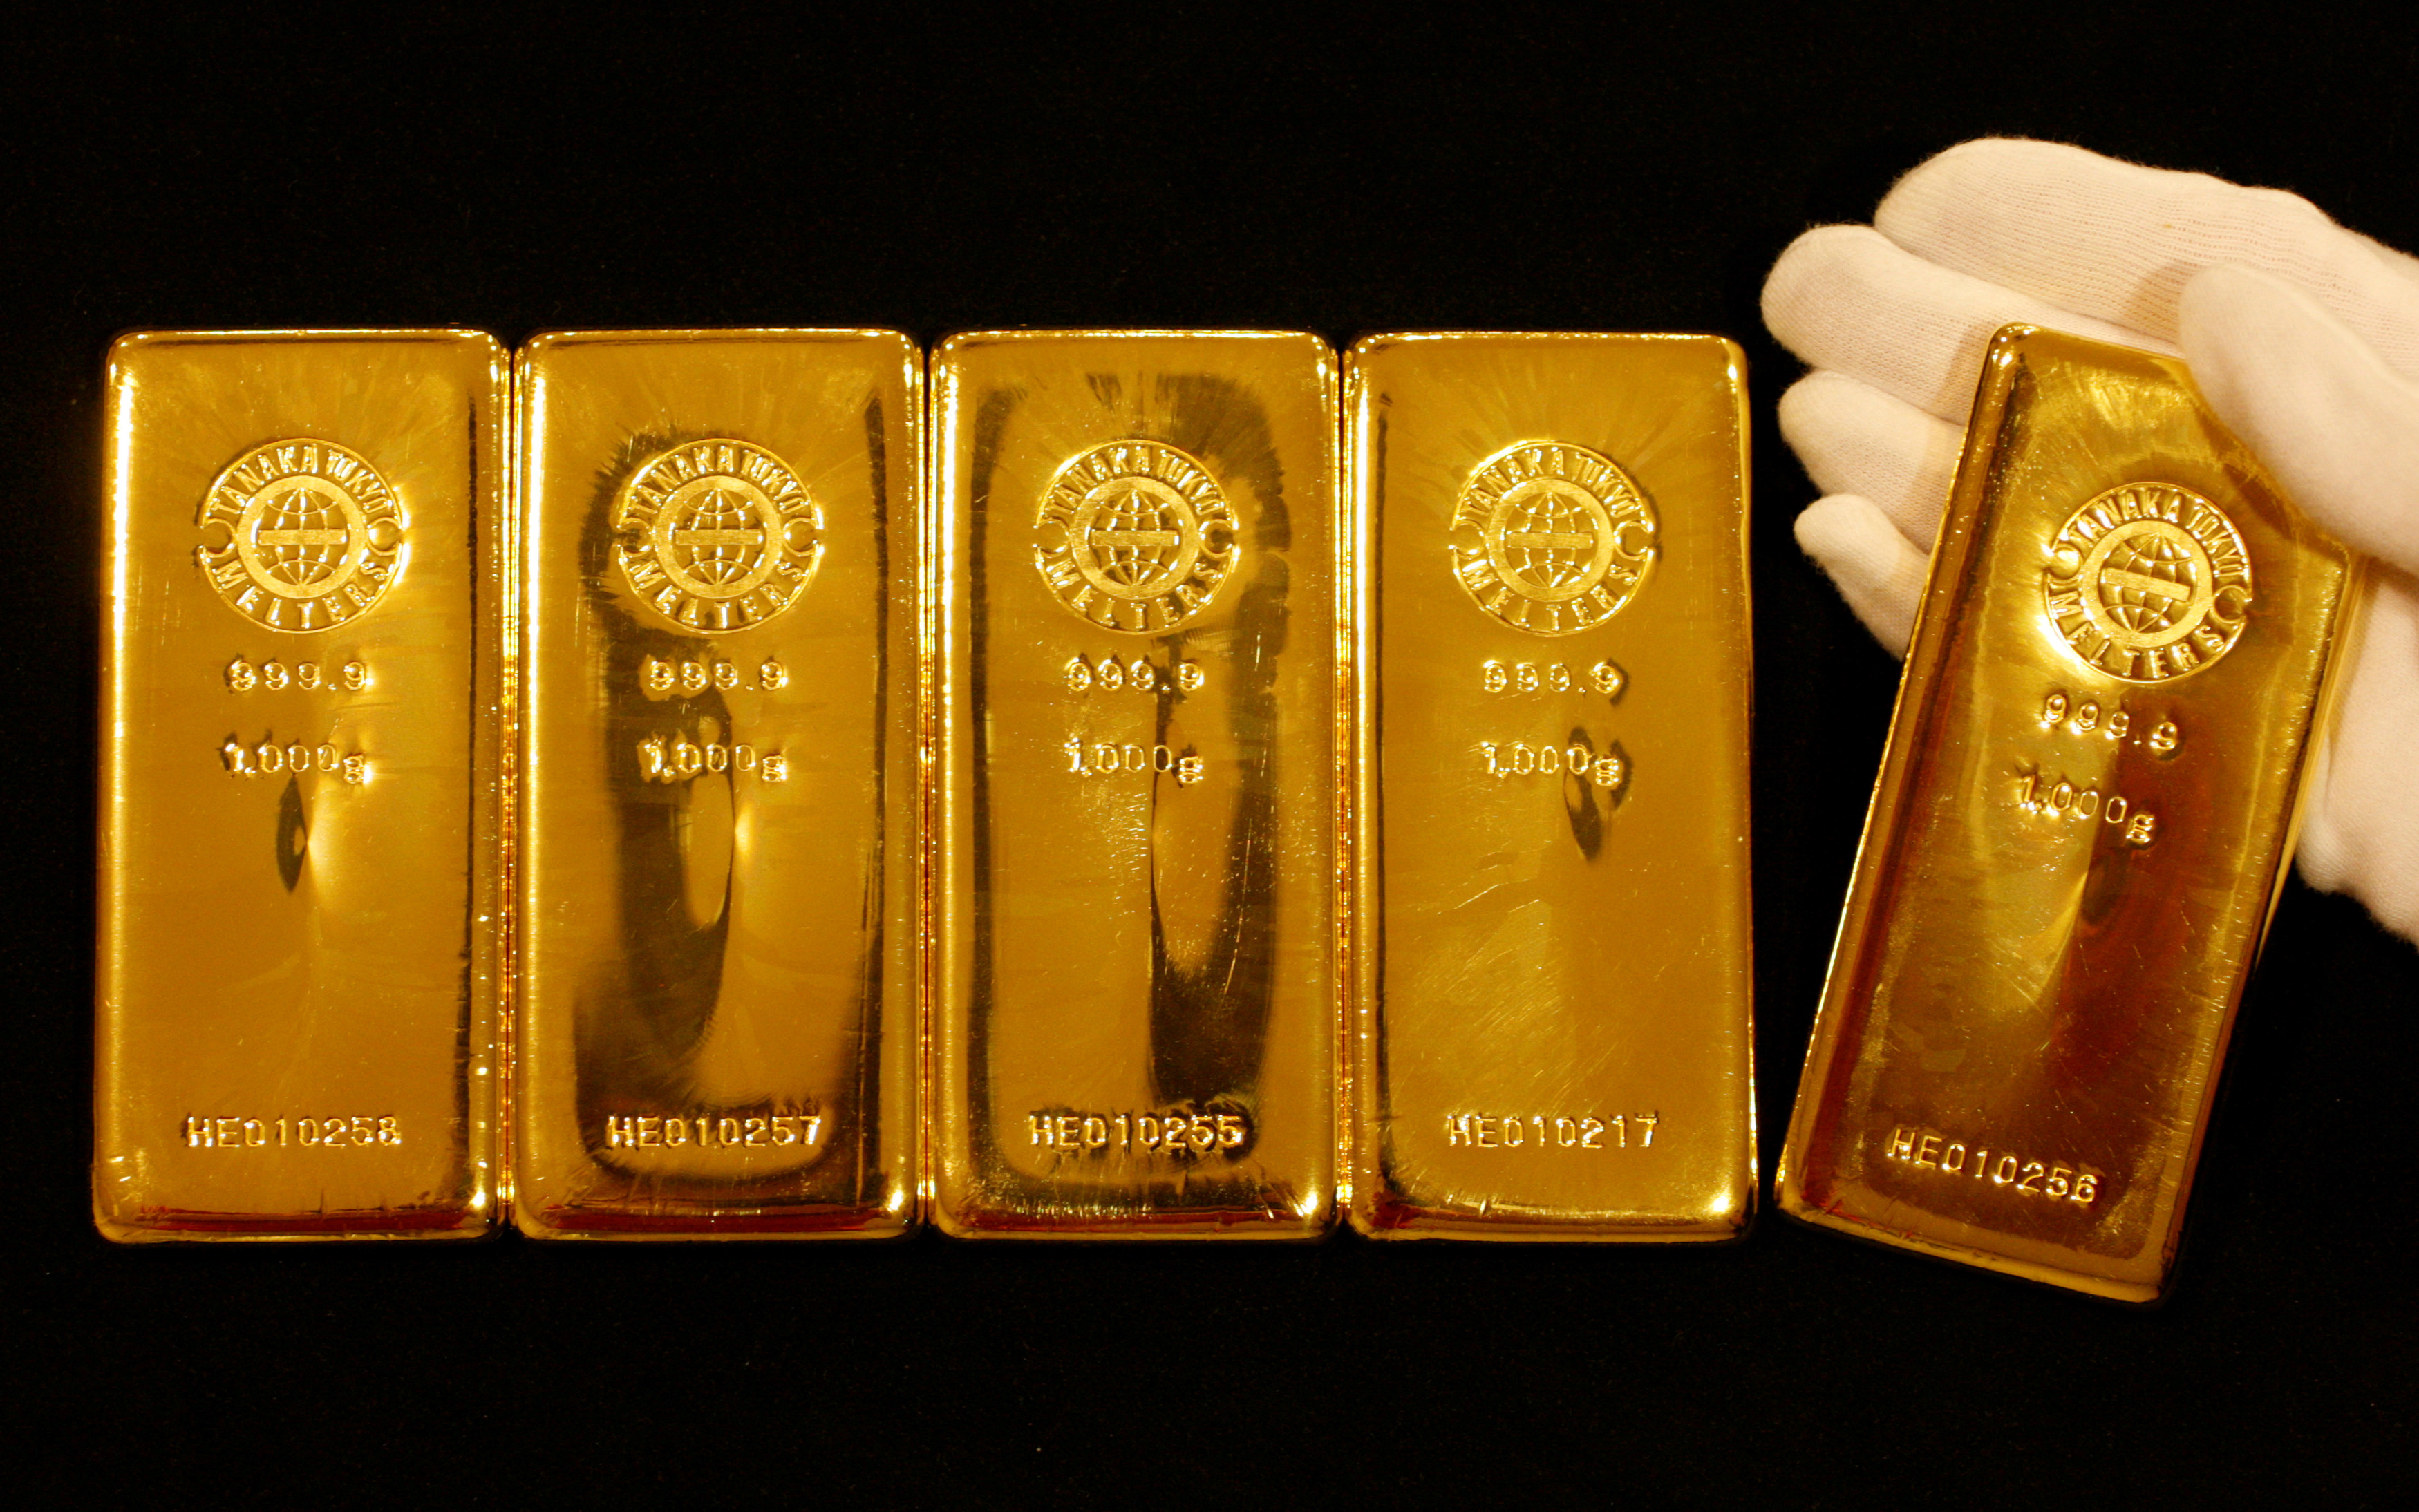 Gold bars are displayed during a photo opportunity at the Ginza Tanaka store in Tokyo